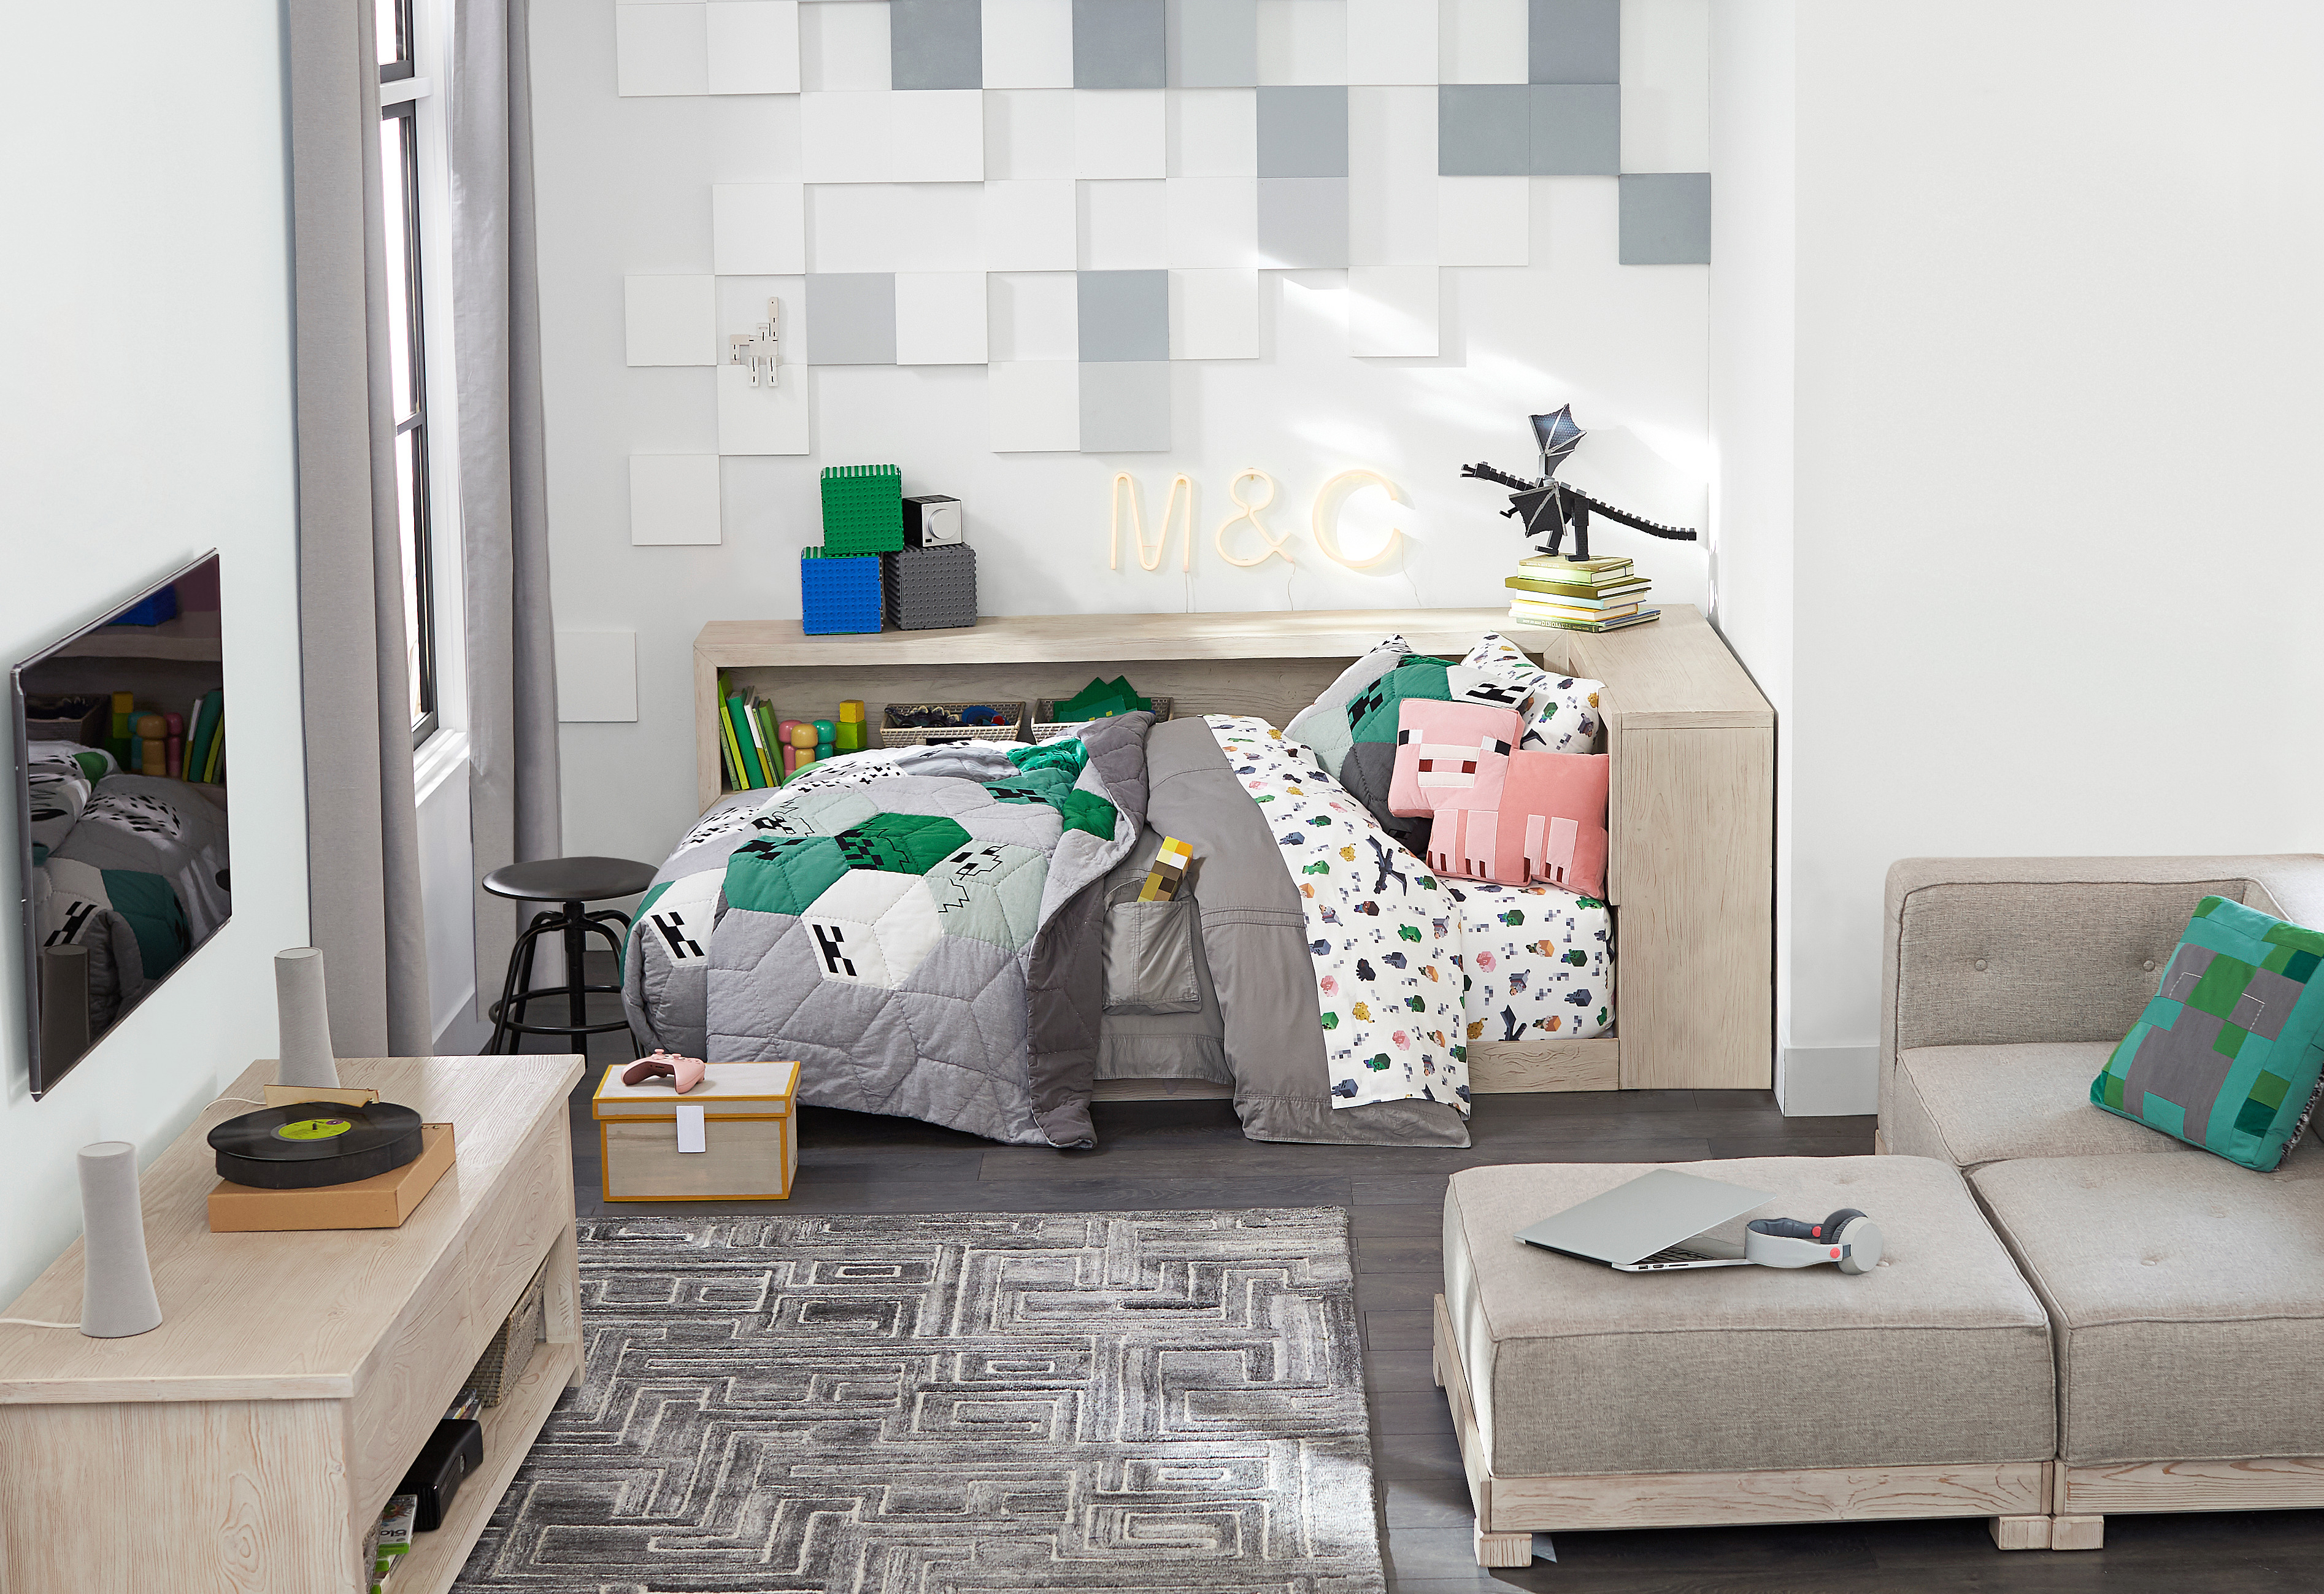 Pottery Barn Kids Releases Imaginative Home Decor Collection In